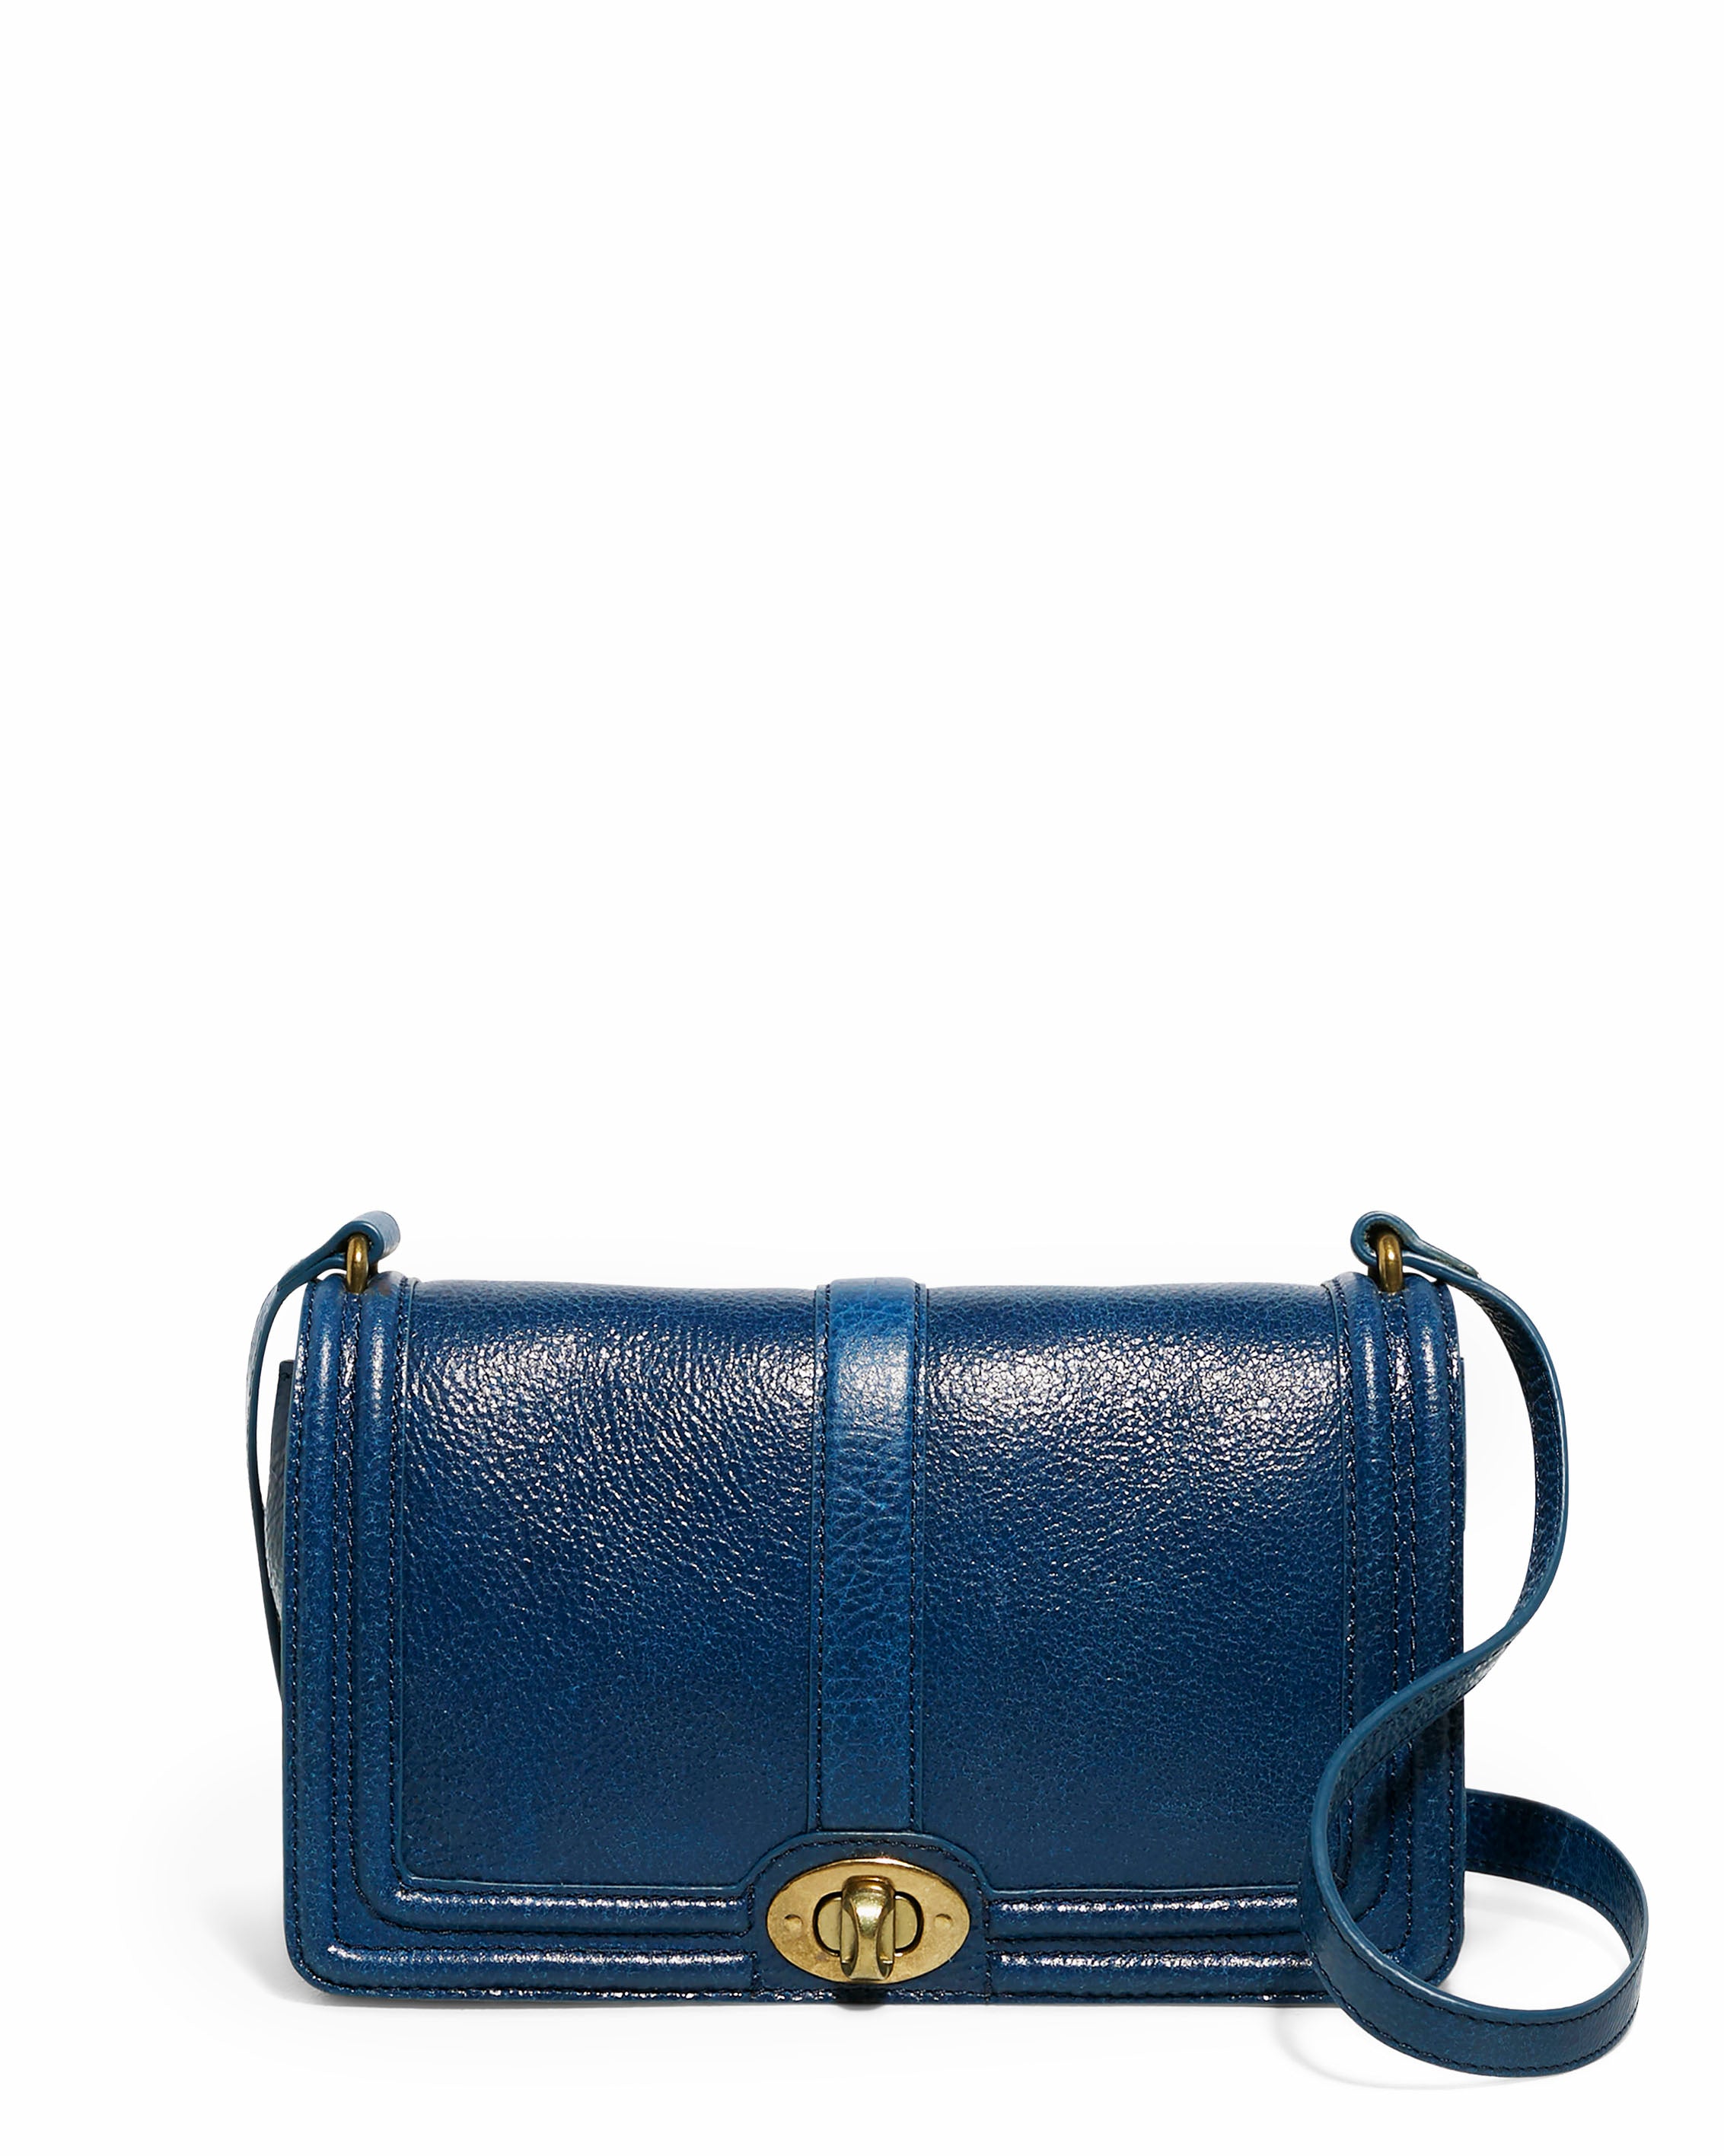 American Leather Co. Becky Crossbody